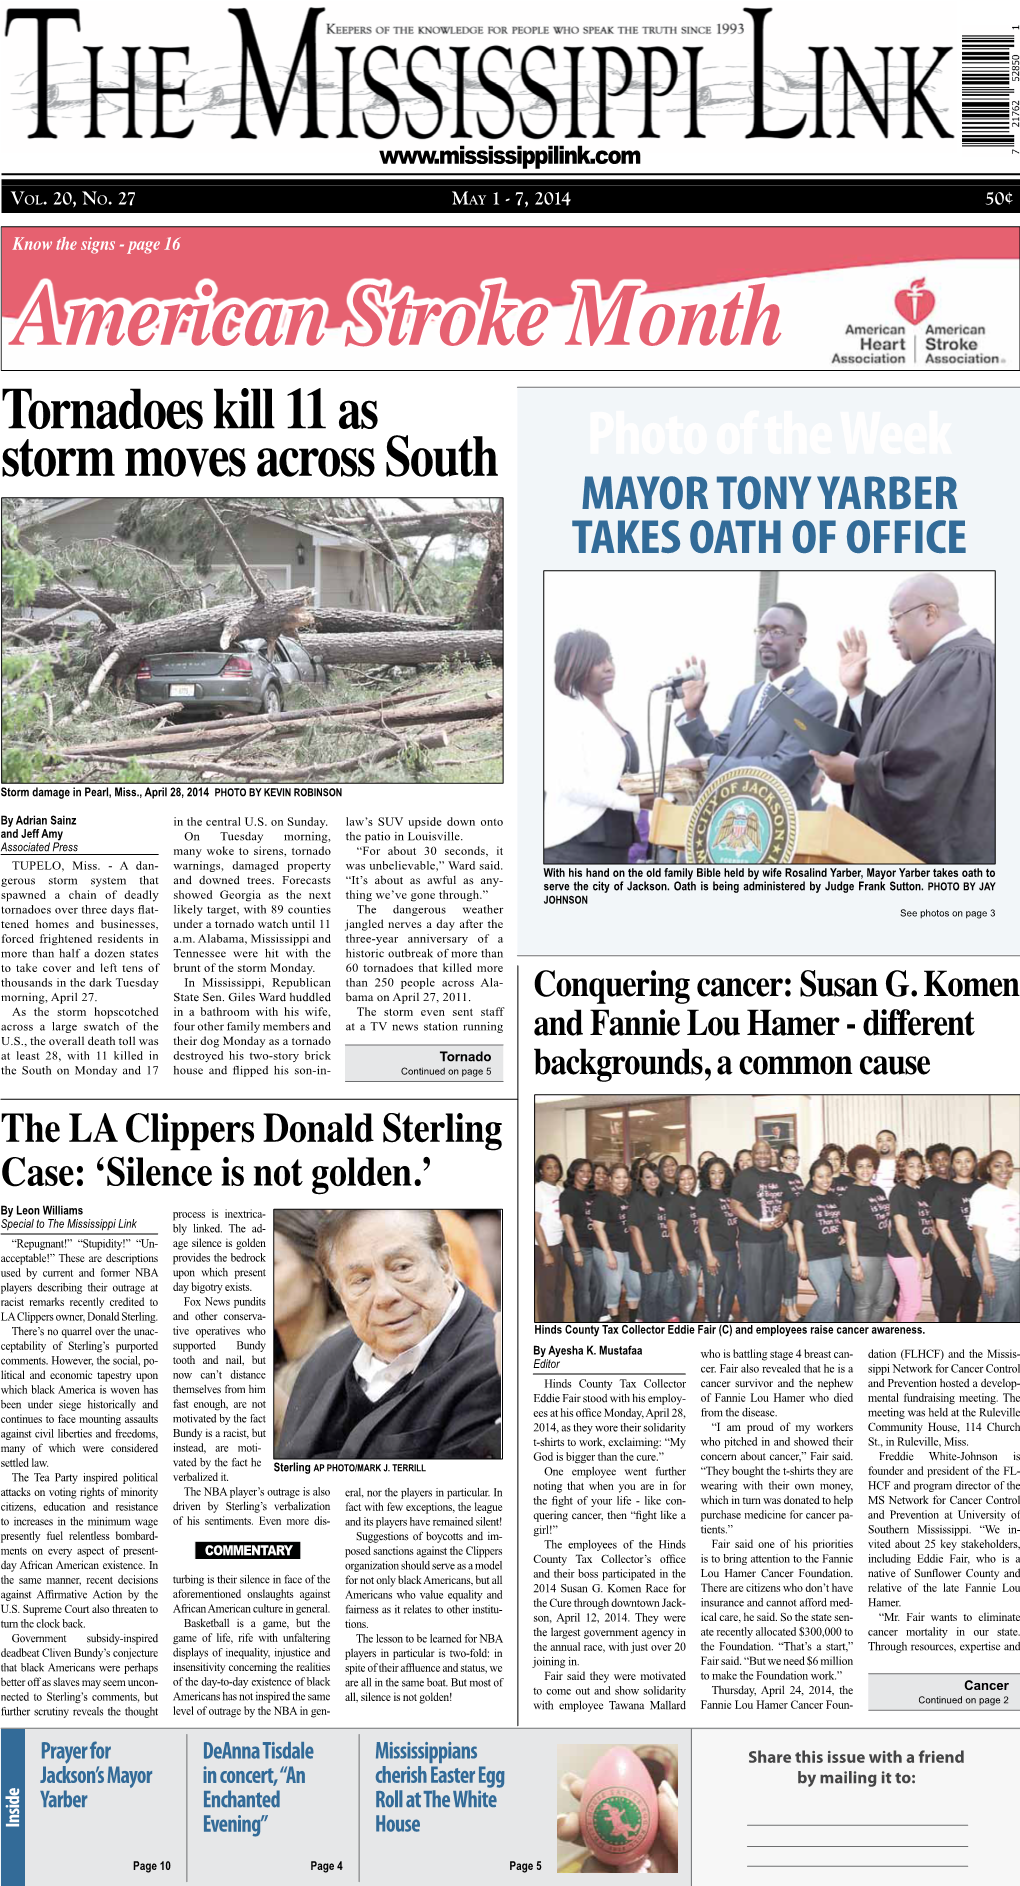 Photo of the Week Storm Moves Across South MAYOR TONY YARBER TAKES OATH of OFFICE